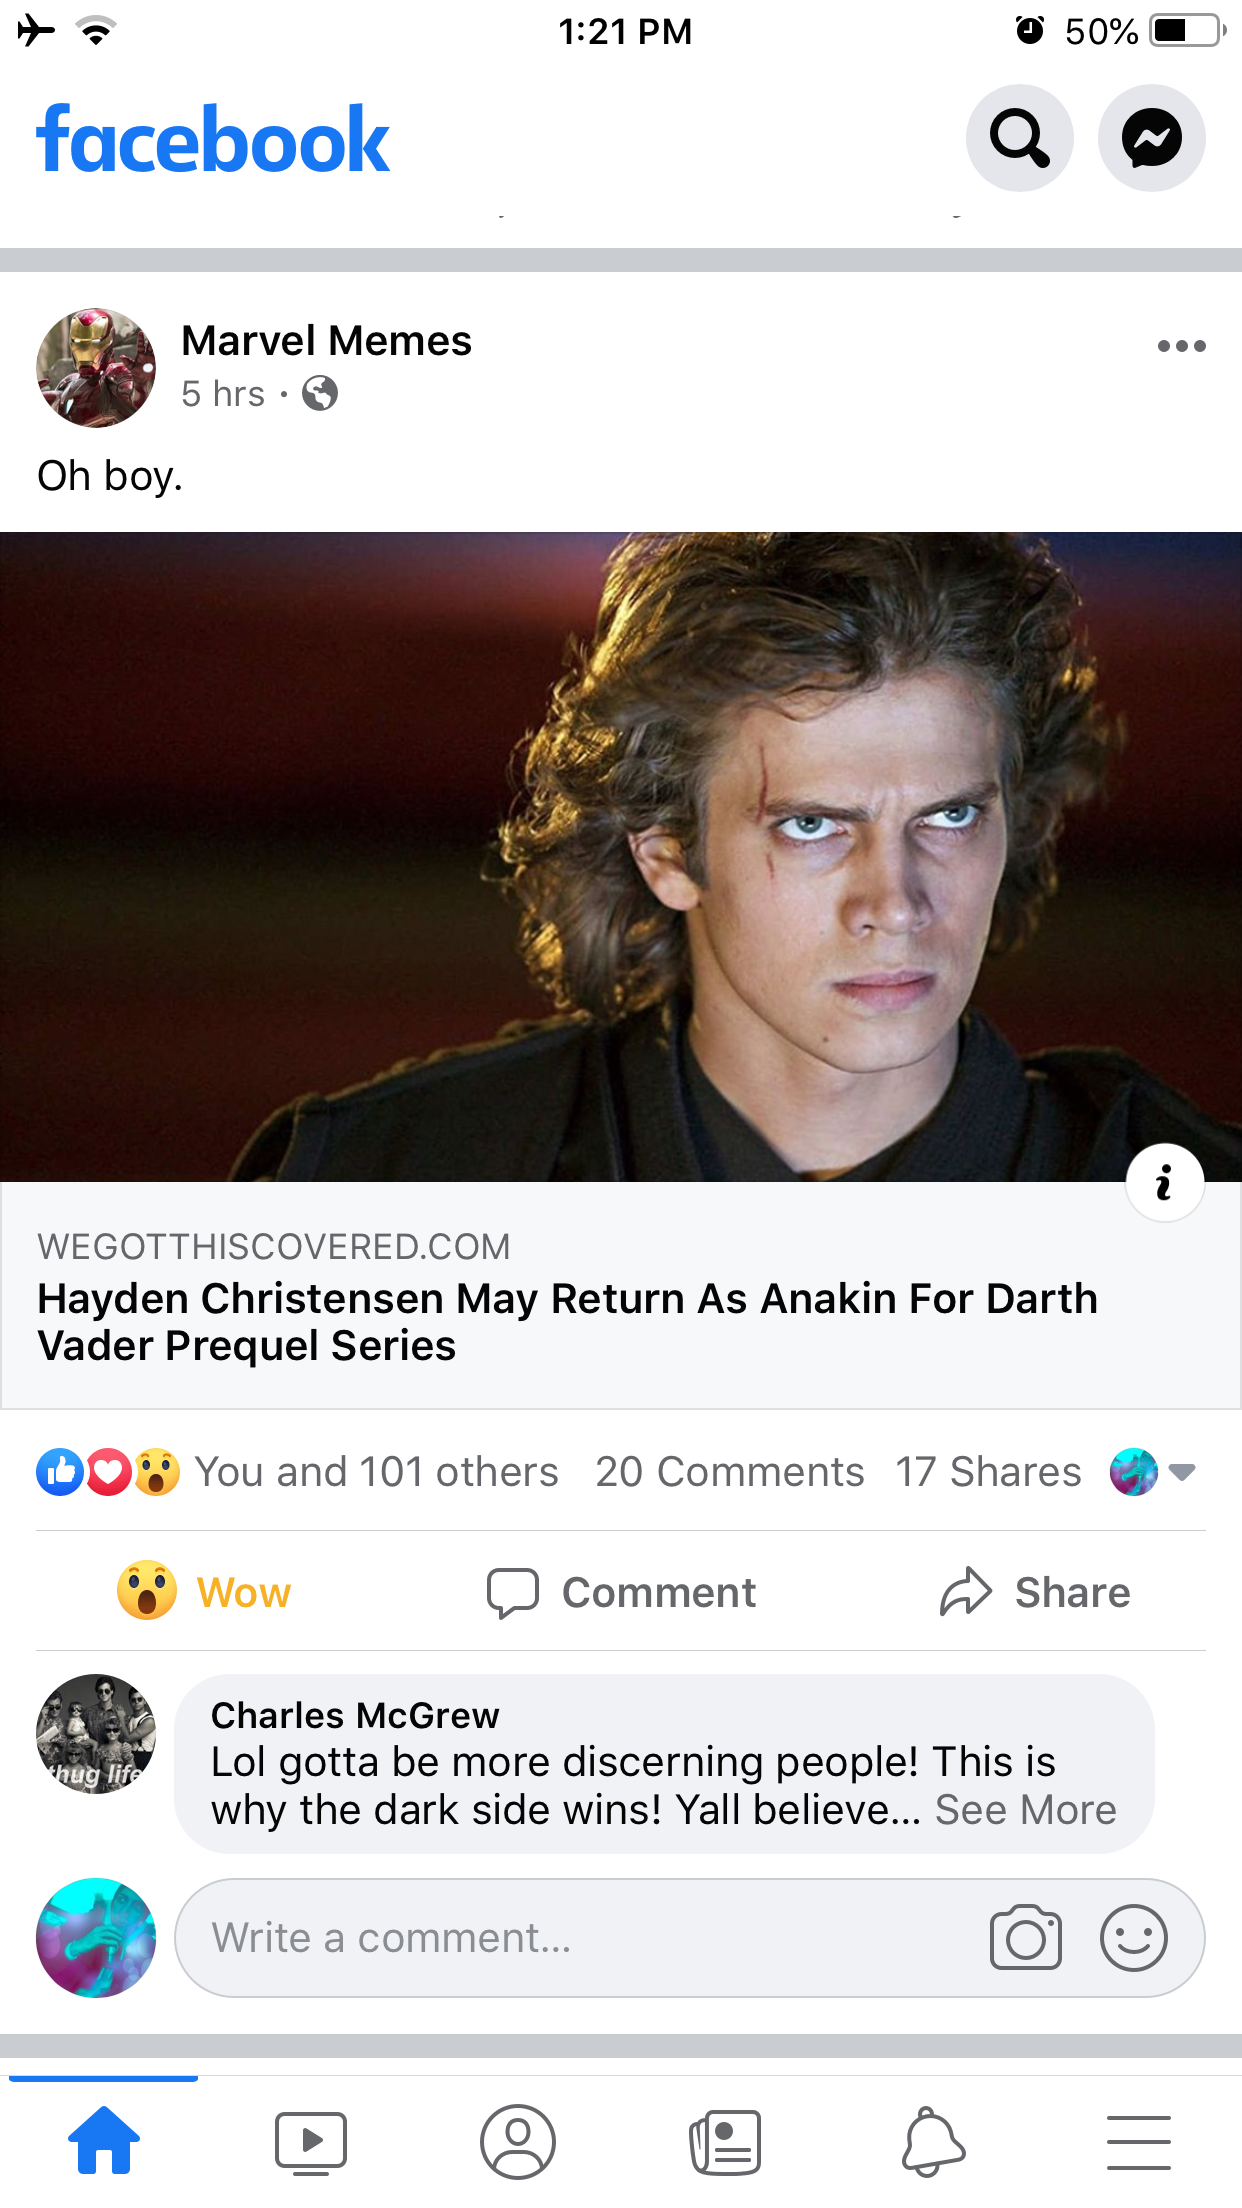 software - 50% facebook Q Marvel Memes 5 hrs Oh boy Wegotthiscovered.Com Hayden Christensen May Return As Anakin For Darth Vader Prequel Series Oo You and 101 others 20 17 Wow Comment Charles McGrew Lol gotta be more discerning people! This is why the dar